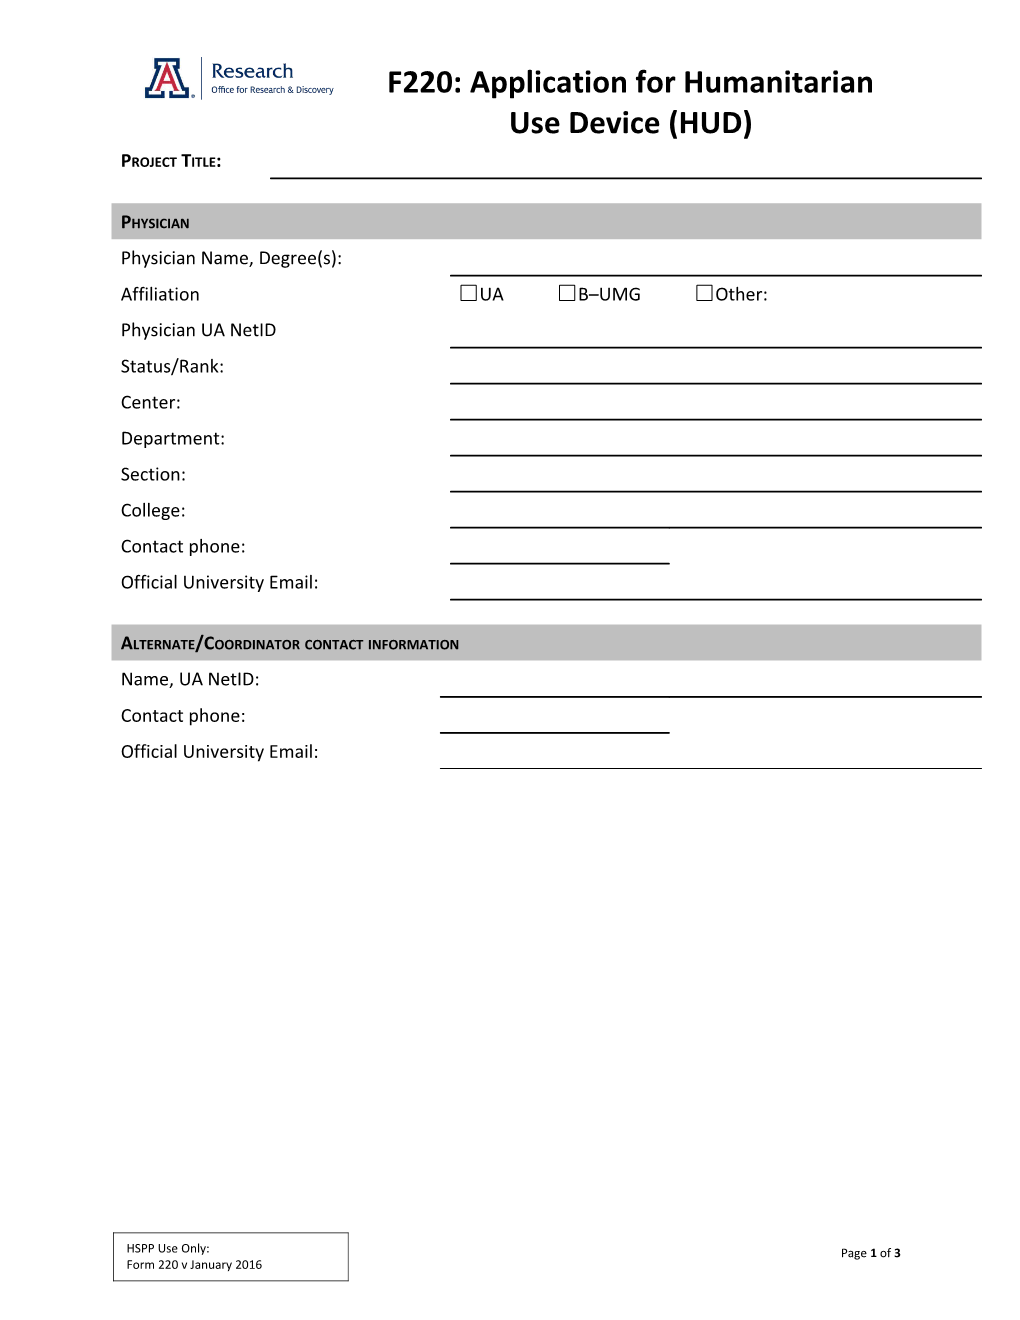 FORM: Application for Humanitarian Use Device (HUD)